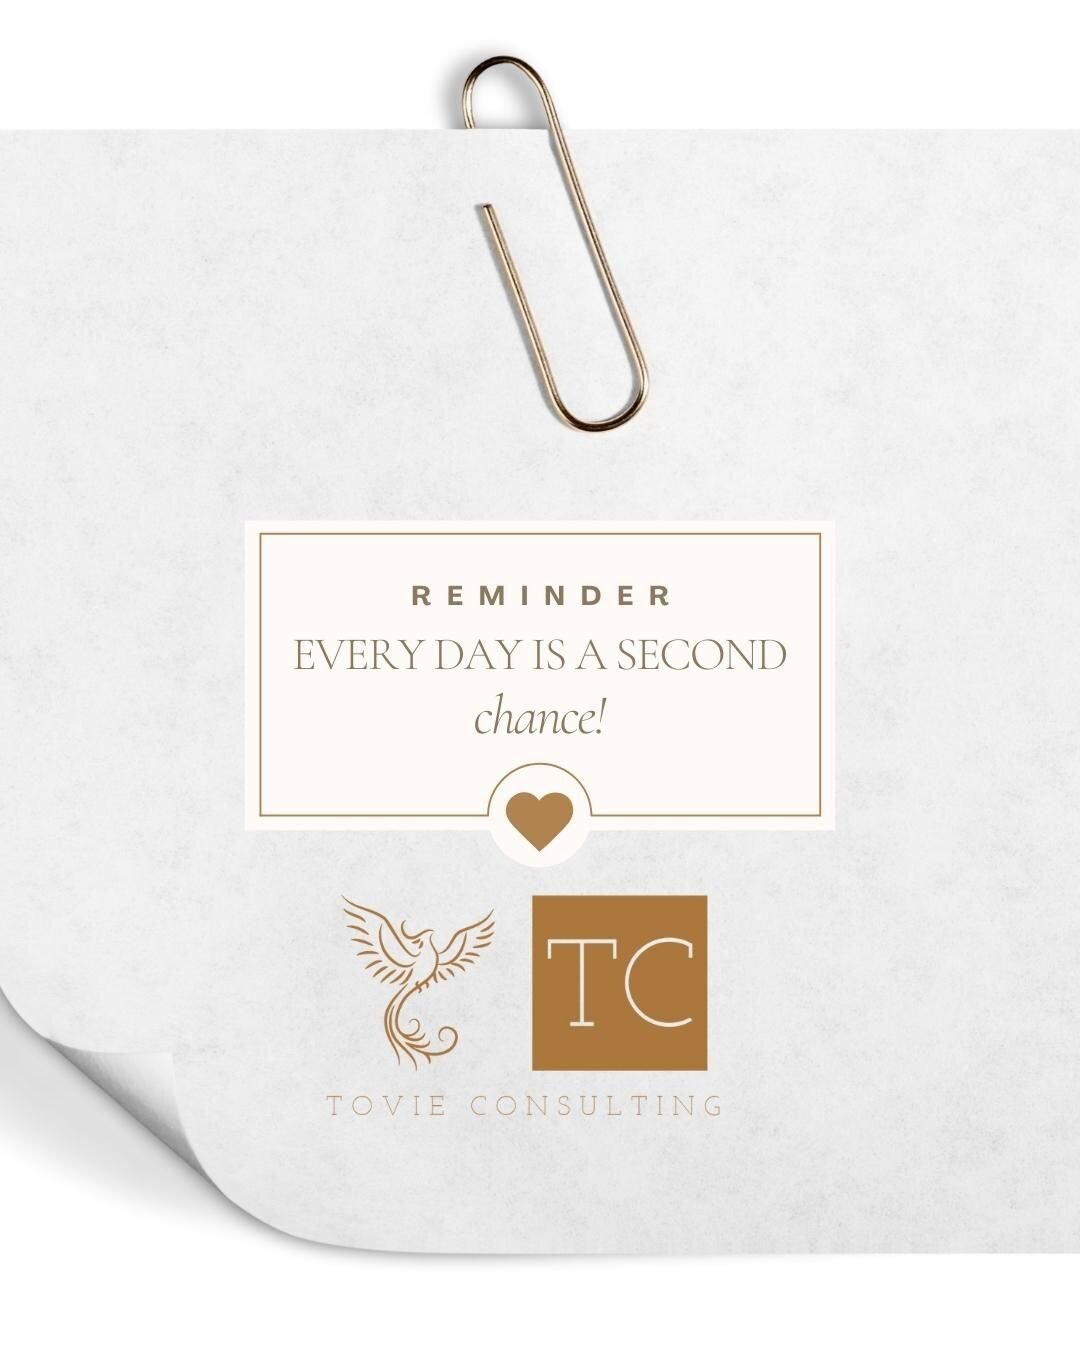 December 2nd🗓️ Whether it becomes your second chance, page, or chapter is up to you. Book with us to give your resume a fresh facelift and open up some new doors! 
 
Visit us at www.tovieconsulting.com
Follow us @tovieconsulting

#tovieconsulting #t